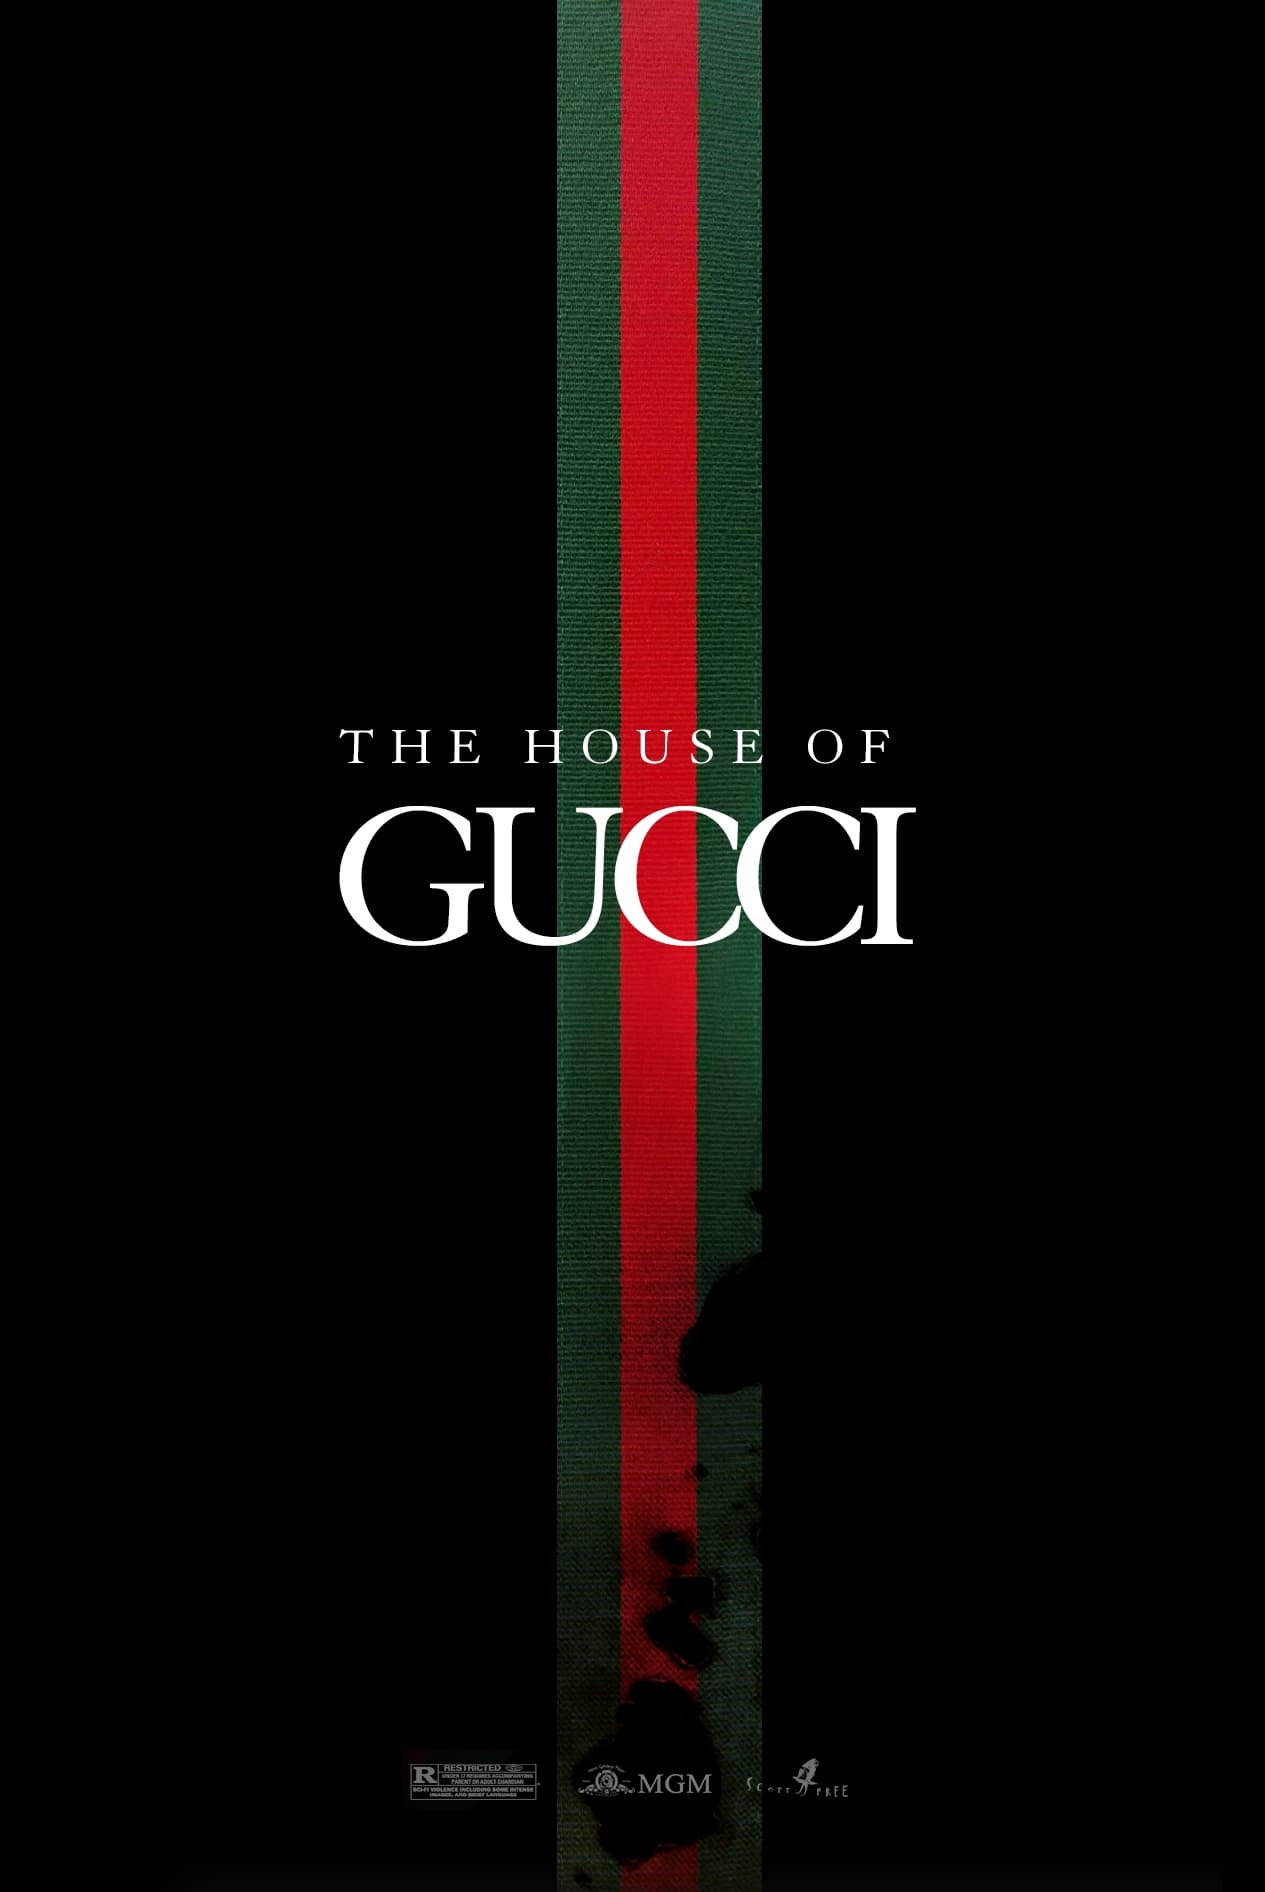 The house of gucci